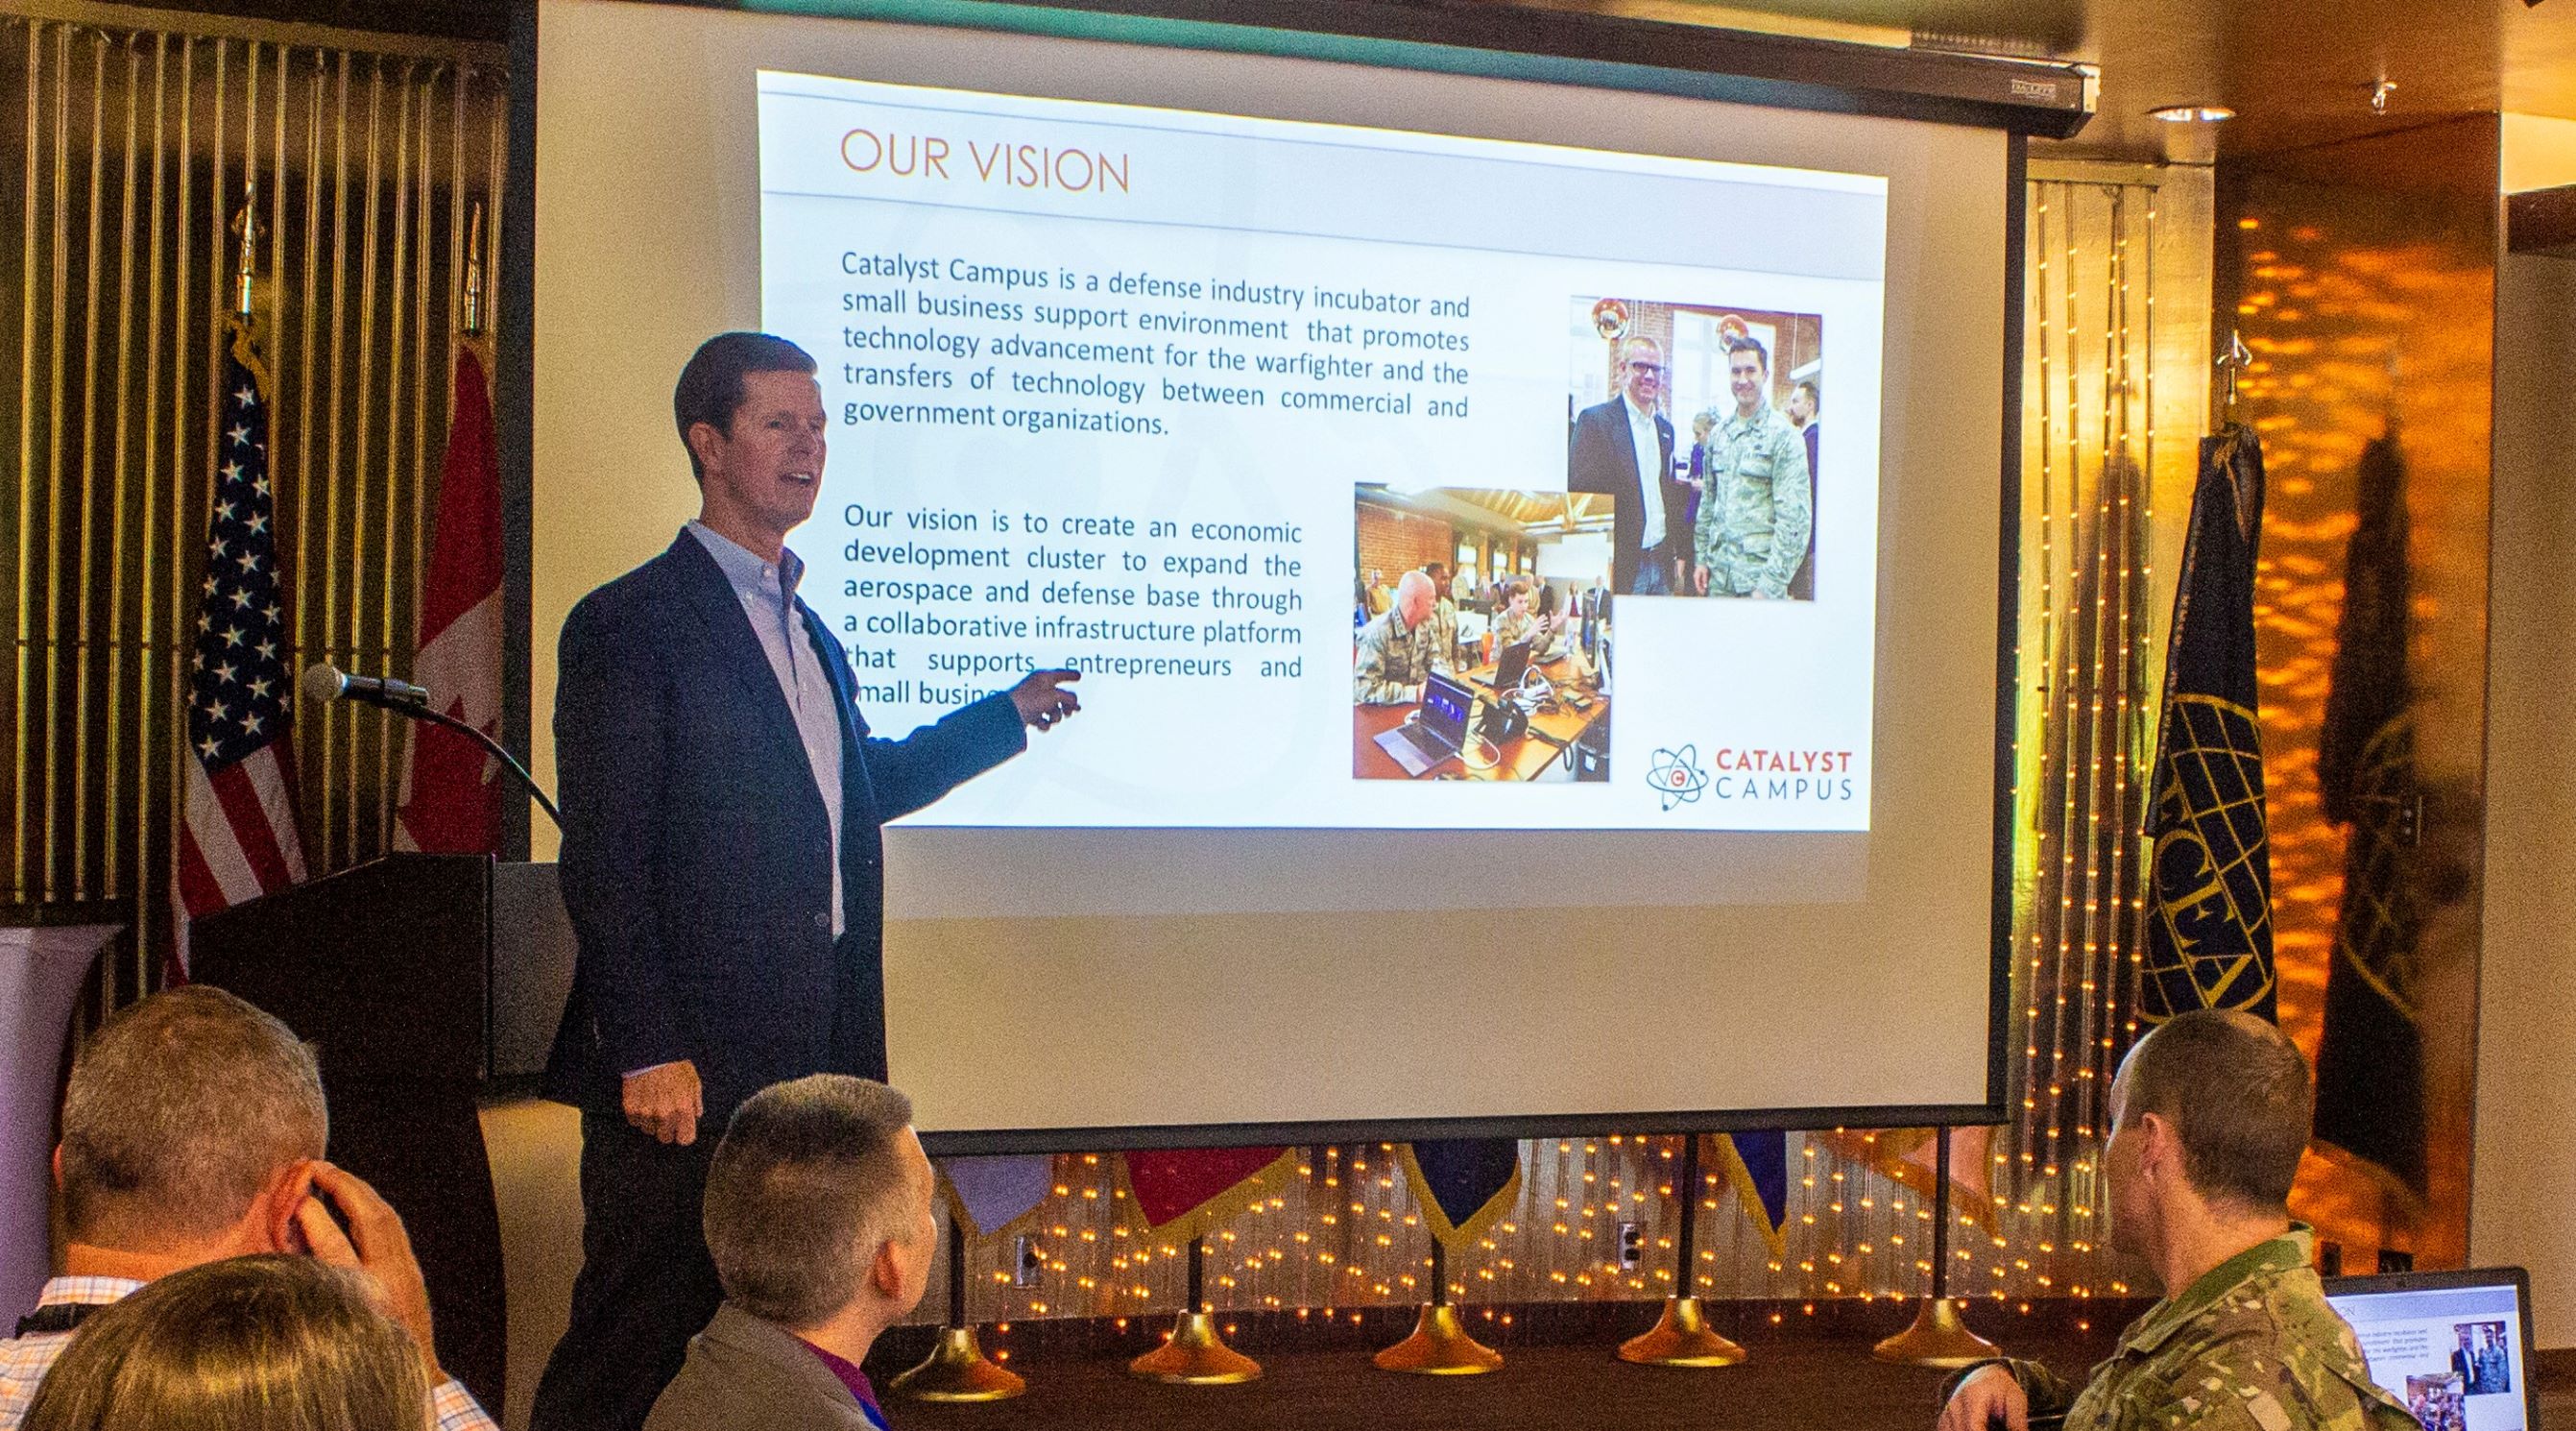 Catalyst Campus for Technology and Innovation Executive Director Rich Burchfield was the keynote speaker at the June luncheon for the Rocky Mountain Chapter of AFCEA, held at the Peterson AFB Club on Thursday, June 27, 2019.